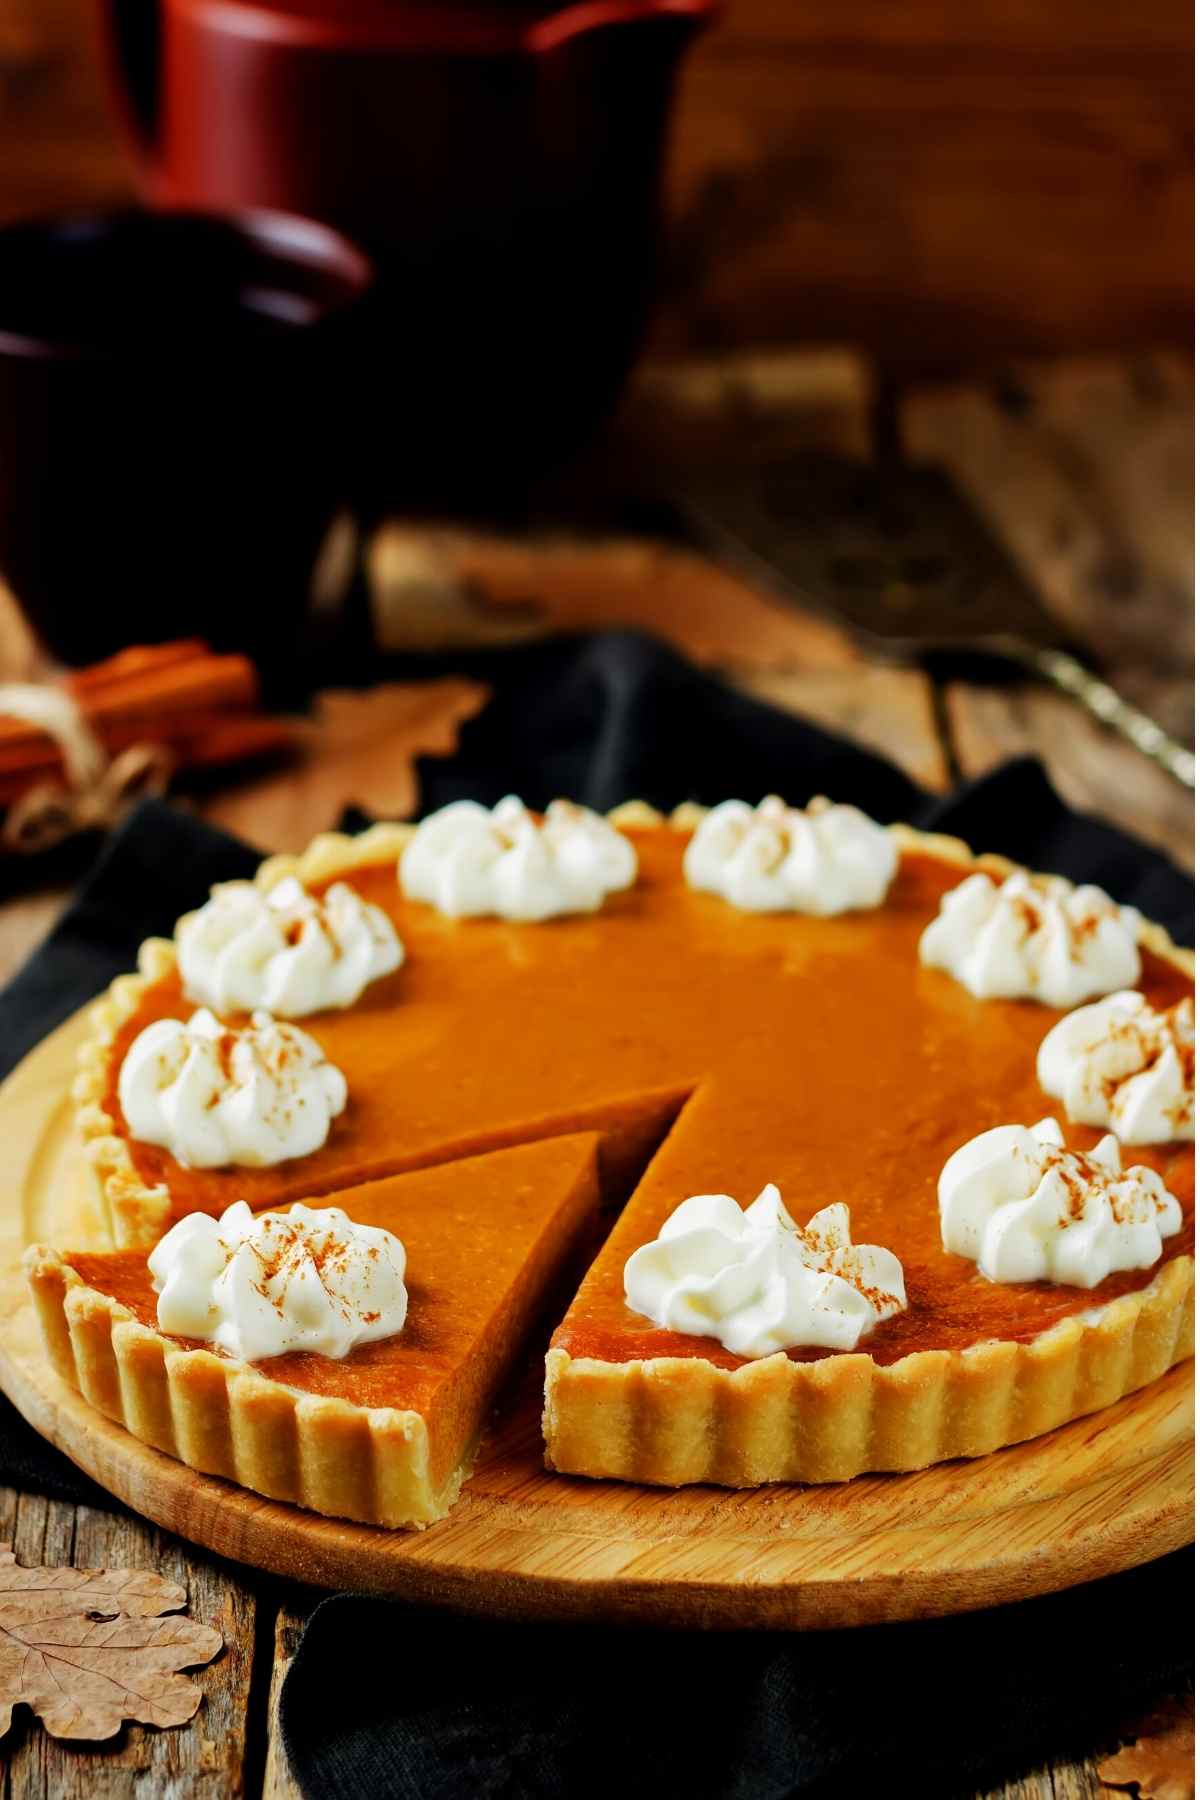 Southern flavors of vanilla, brown sugar, and warm spices shine through in this classic sweet potato pie. It’s a classic dessert that’s been a favorite among African Americans for generations.